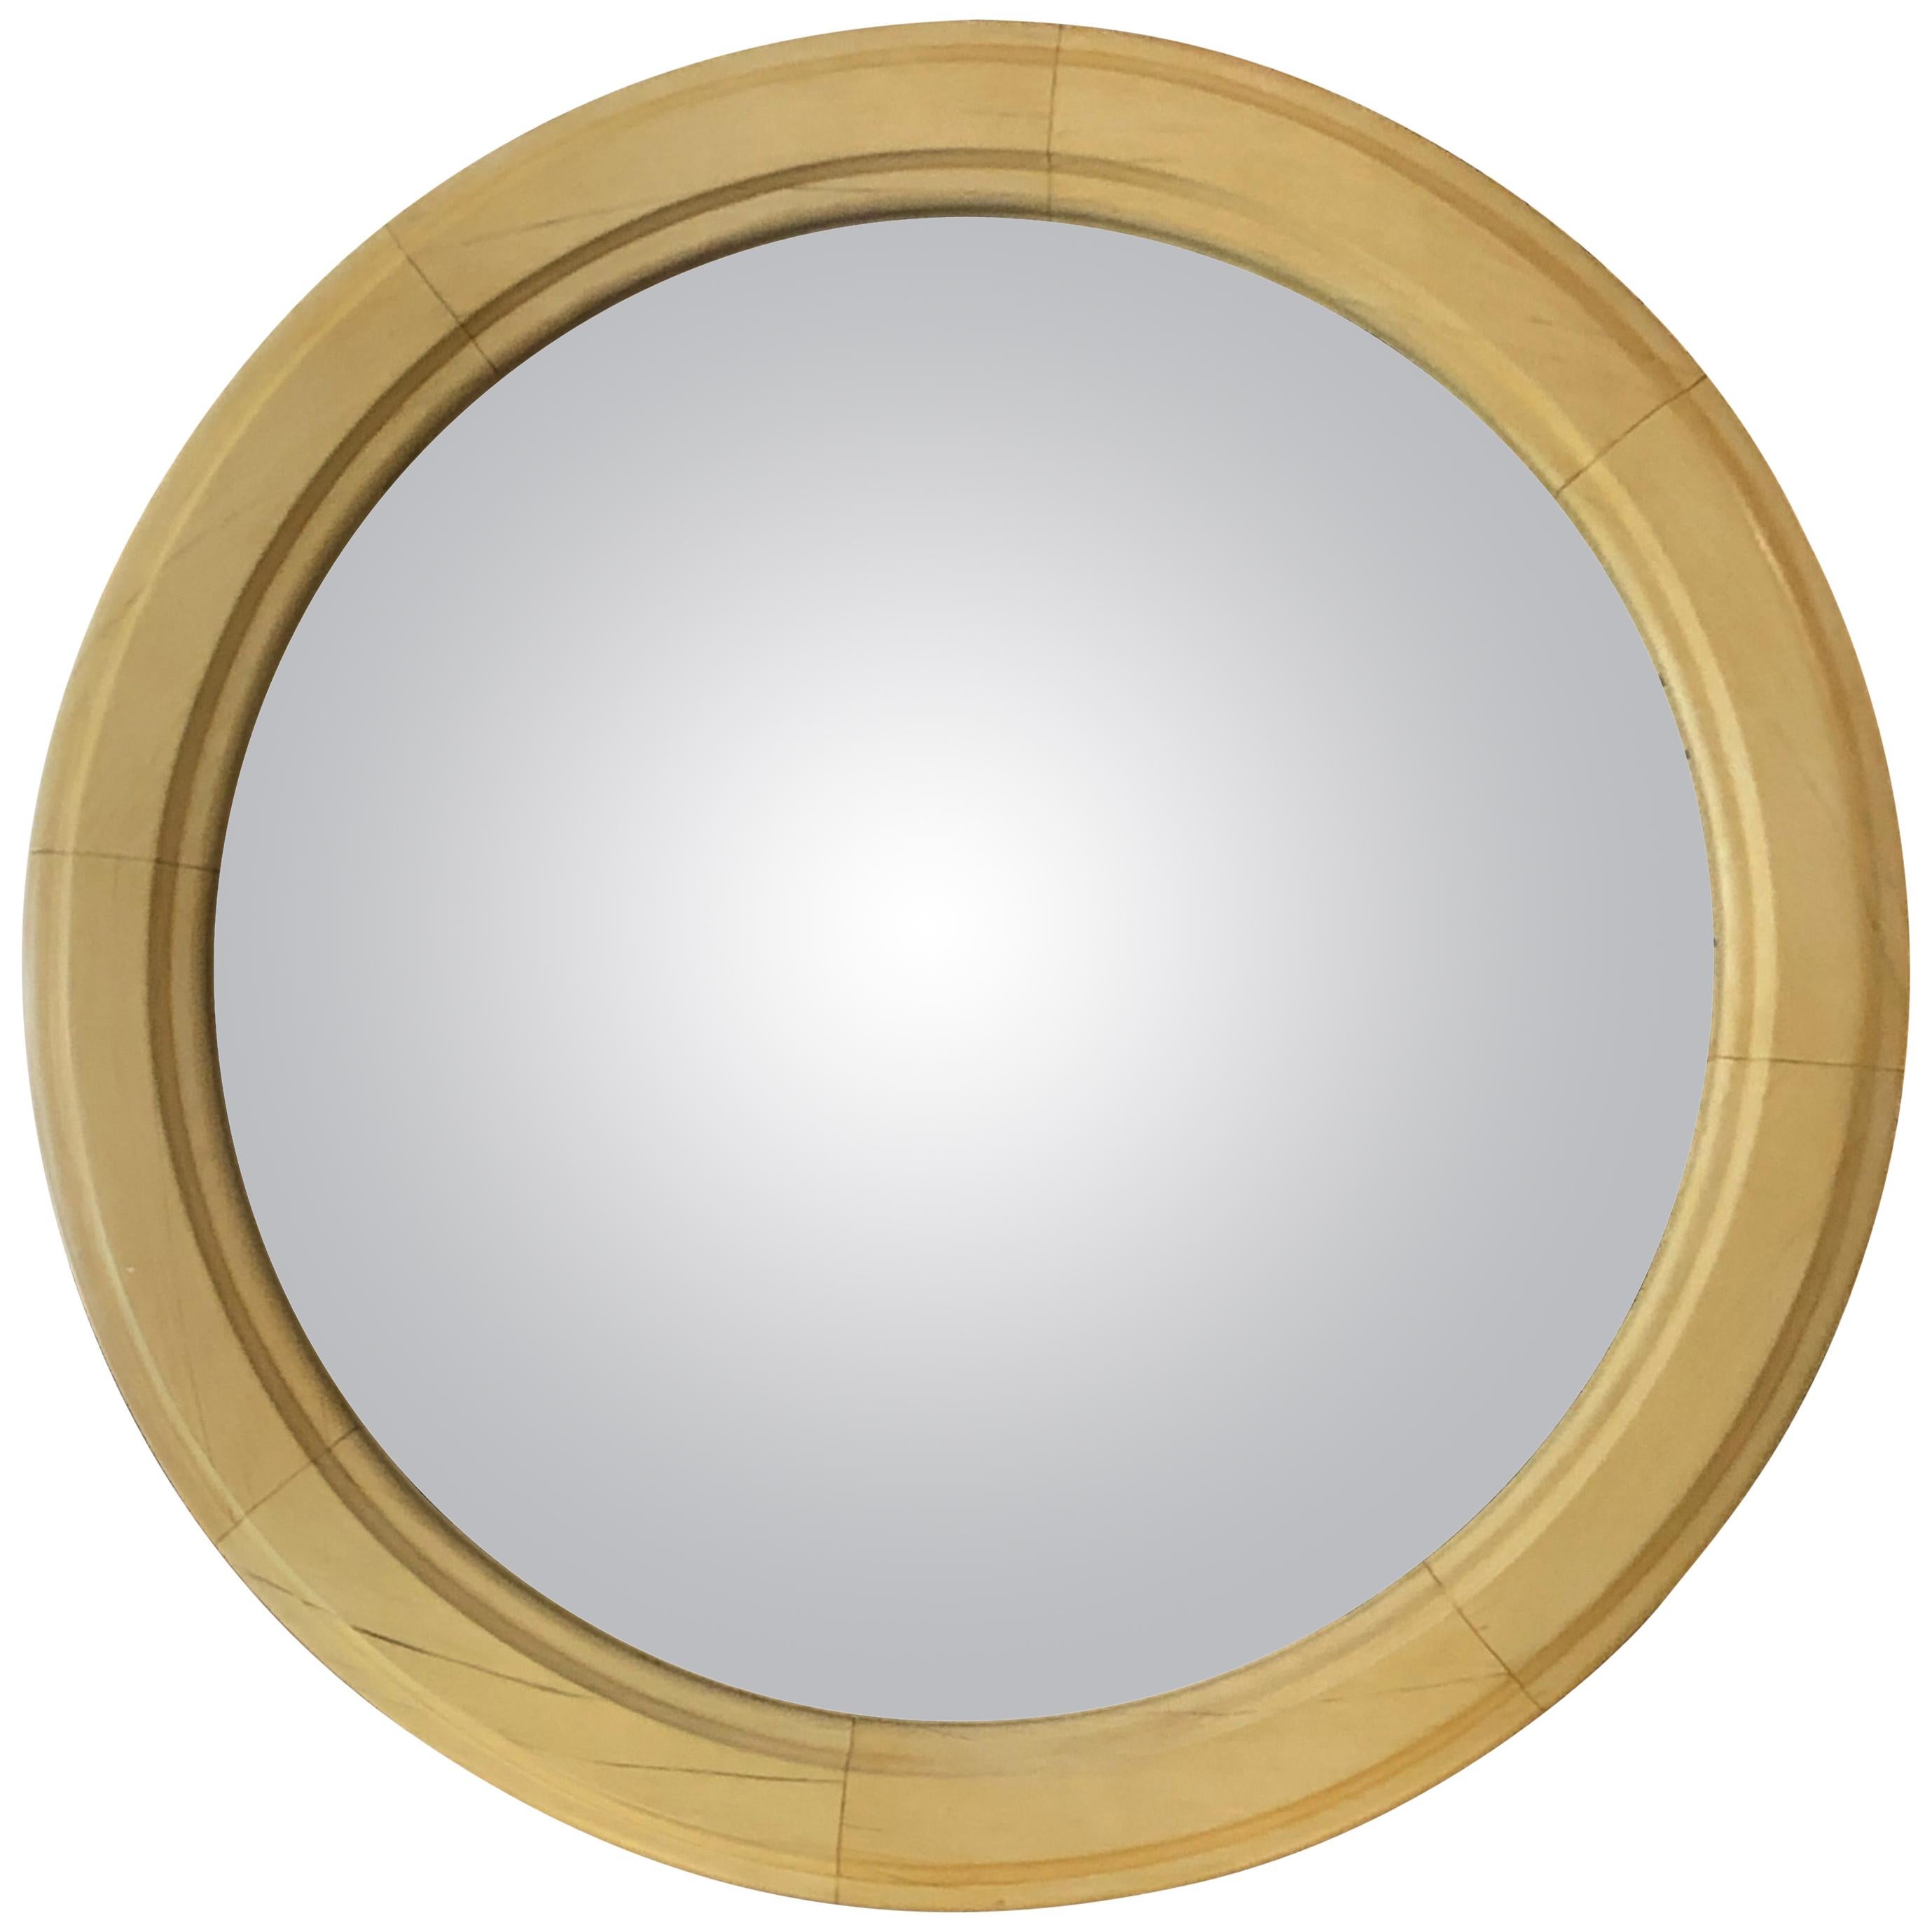  19th Century Parisian Painted Faux Ivory Convex Ghosted Aged Bullseye Mirror 